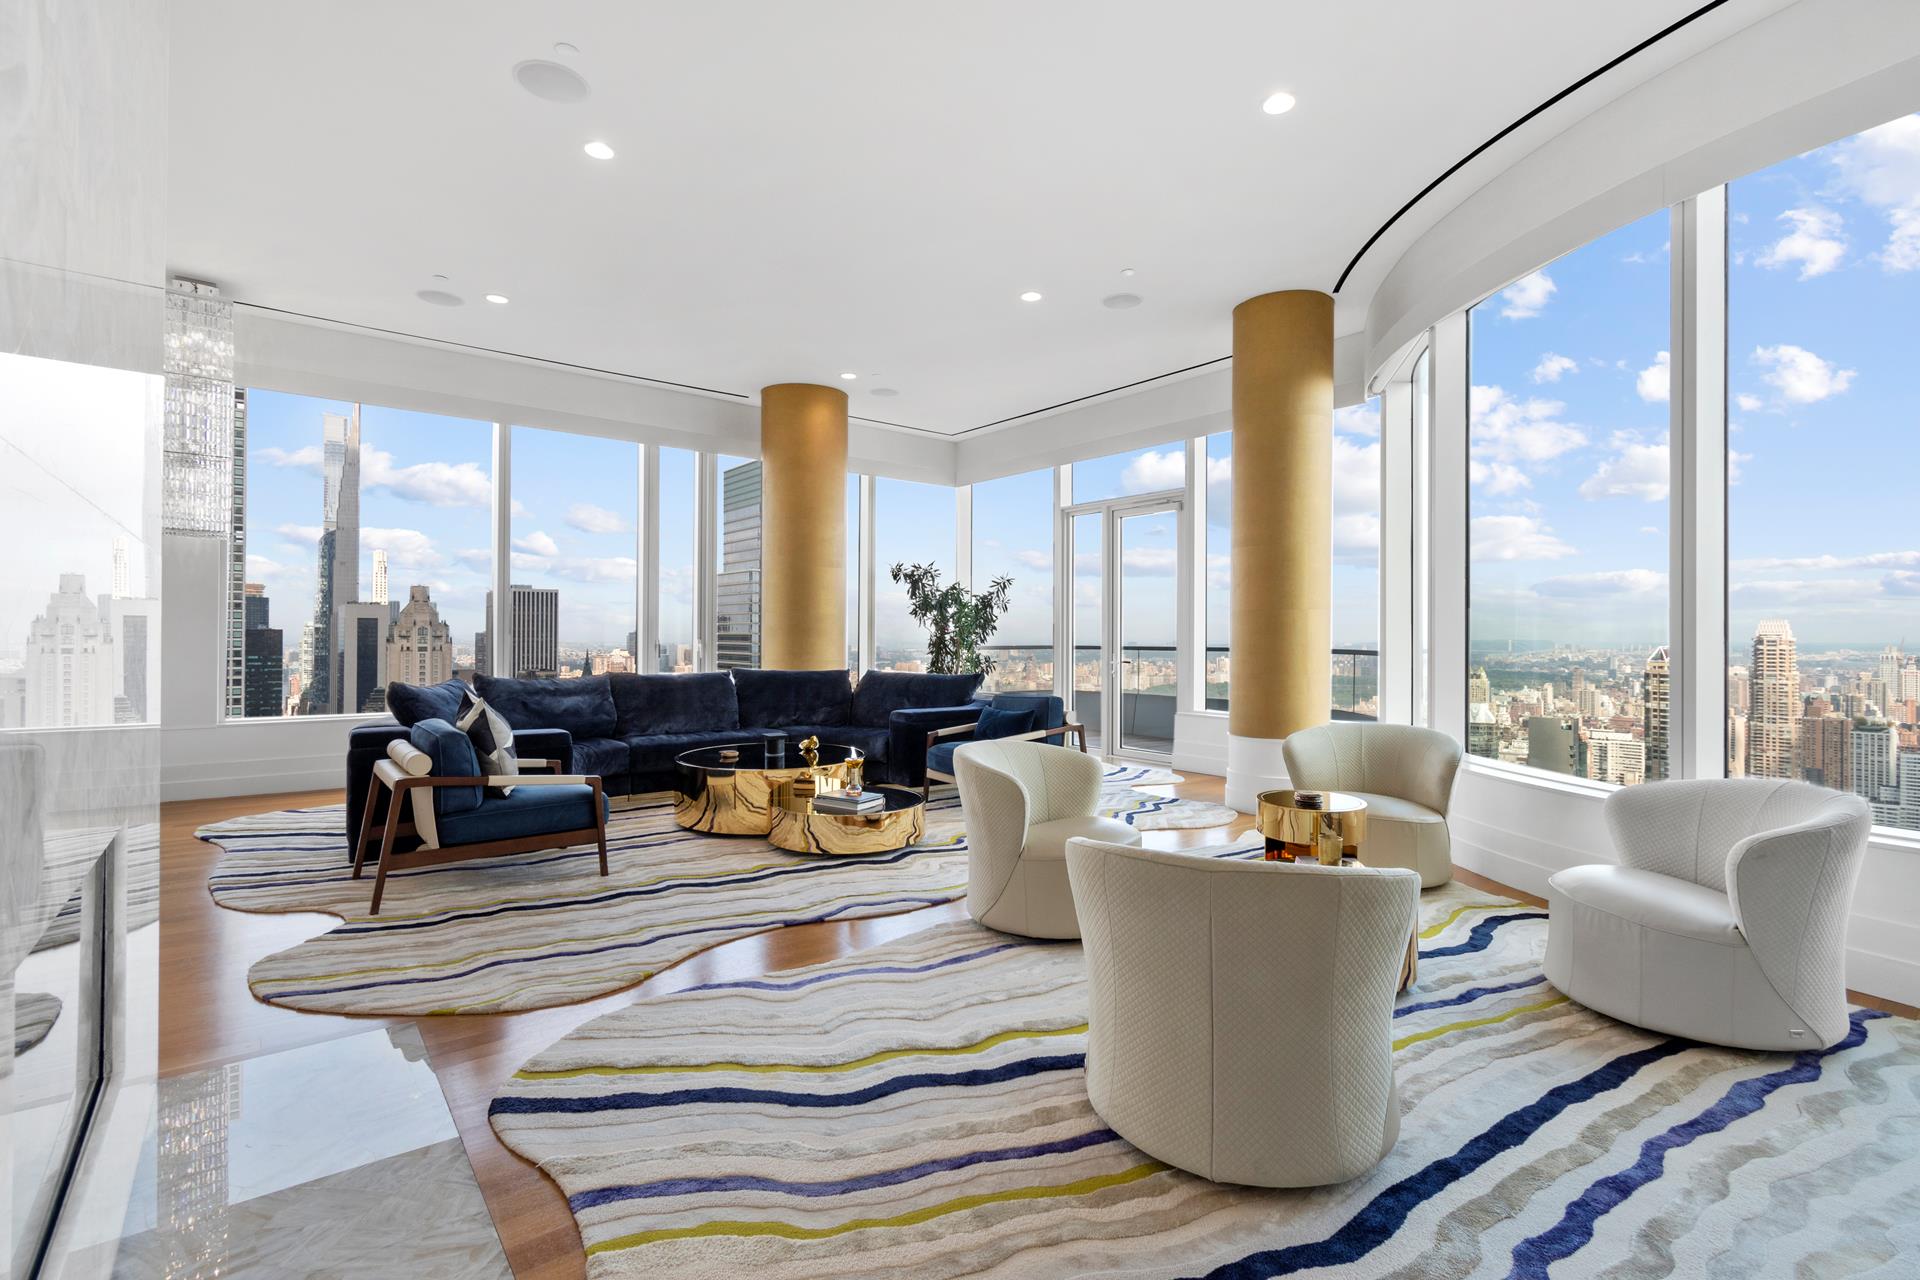 252 East 57th Street 62A, Sutton Place, Midtown East, NYC - 5 Bedrooms  
6.5 Bathrooms  
8 Rooms - 